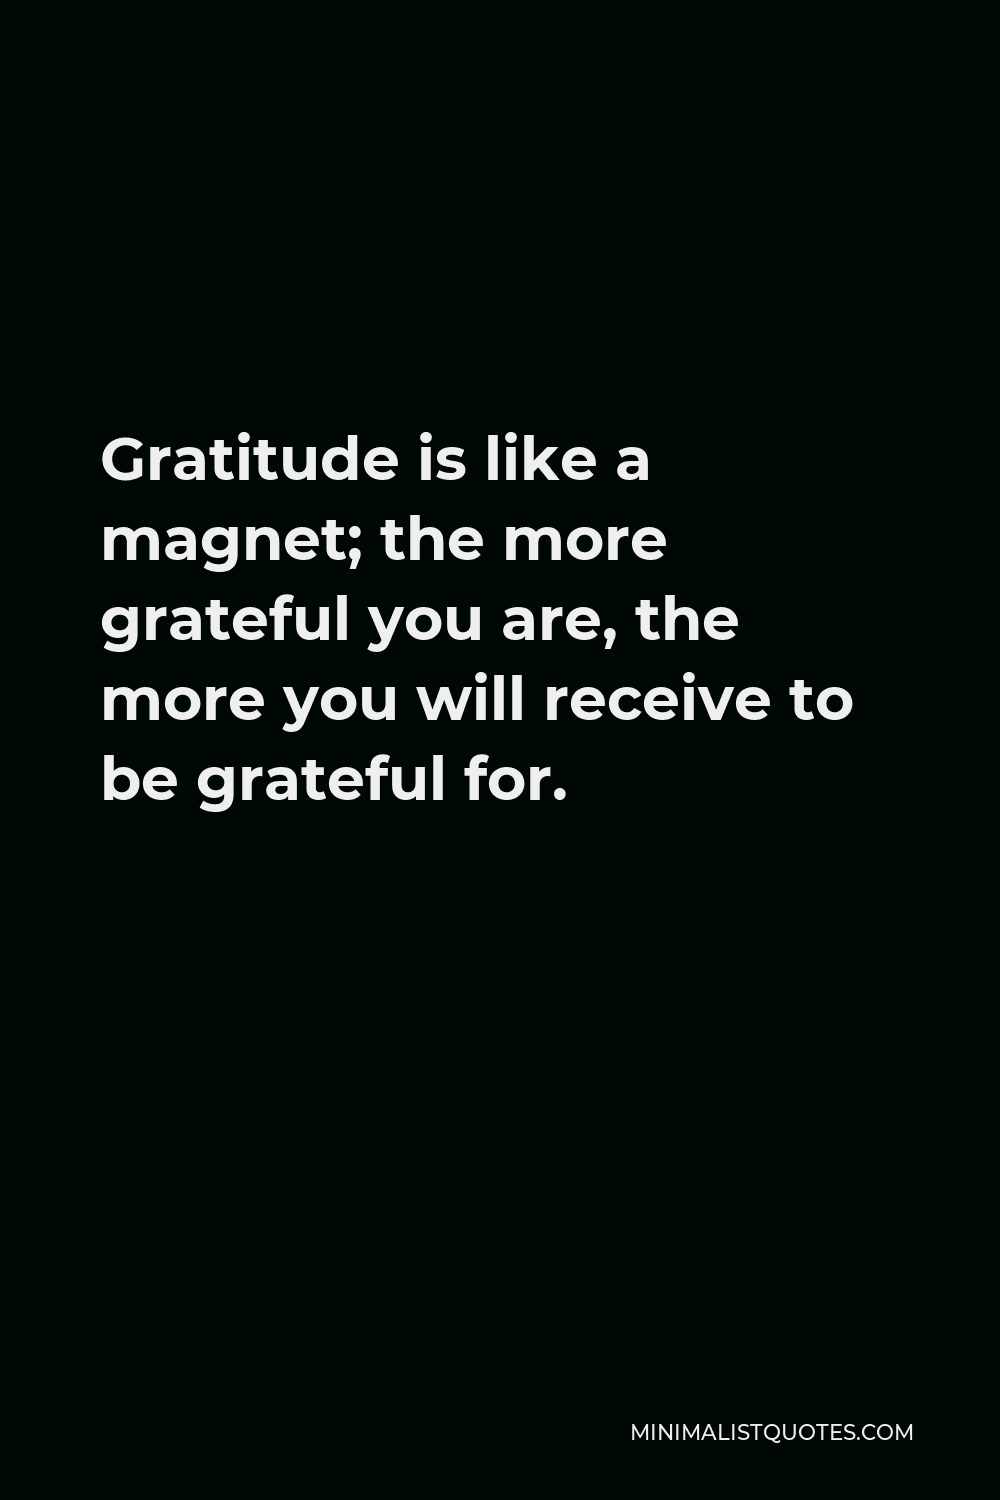 Iyanla Vanzant Quote: Gratitude is like a magnet; the more grateful you ...